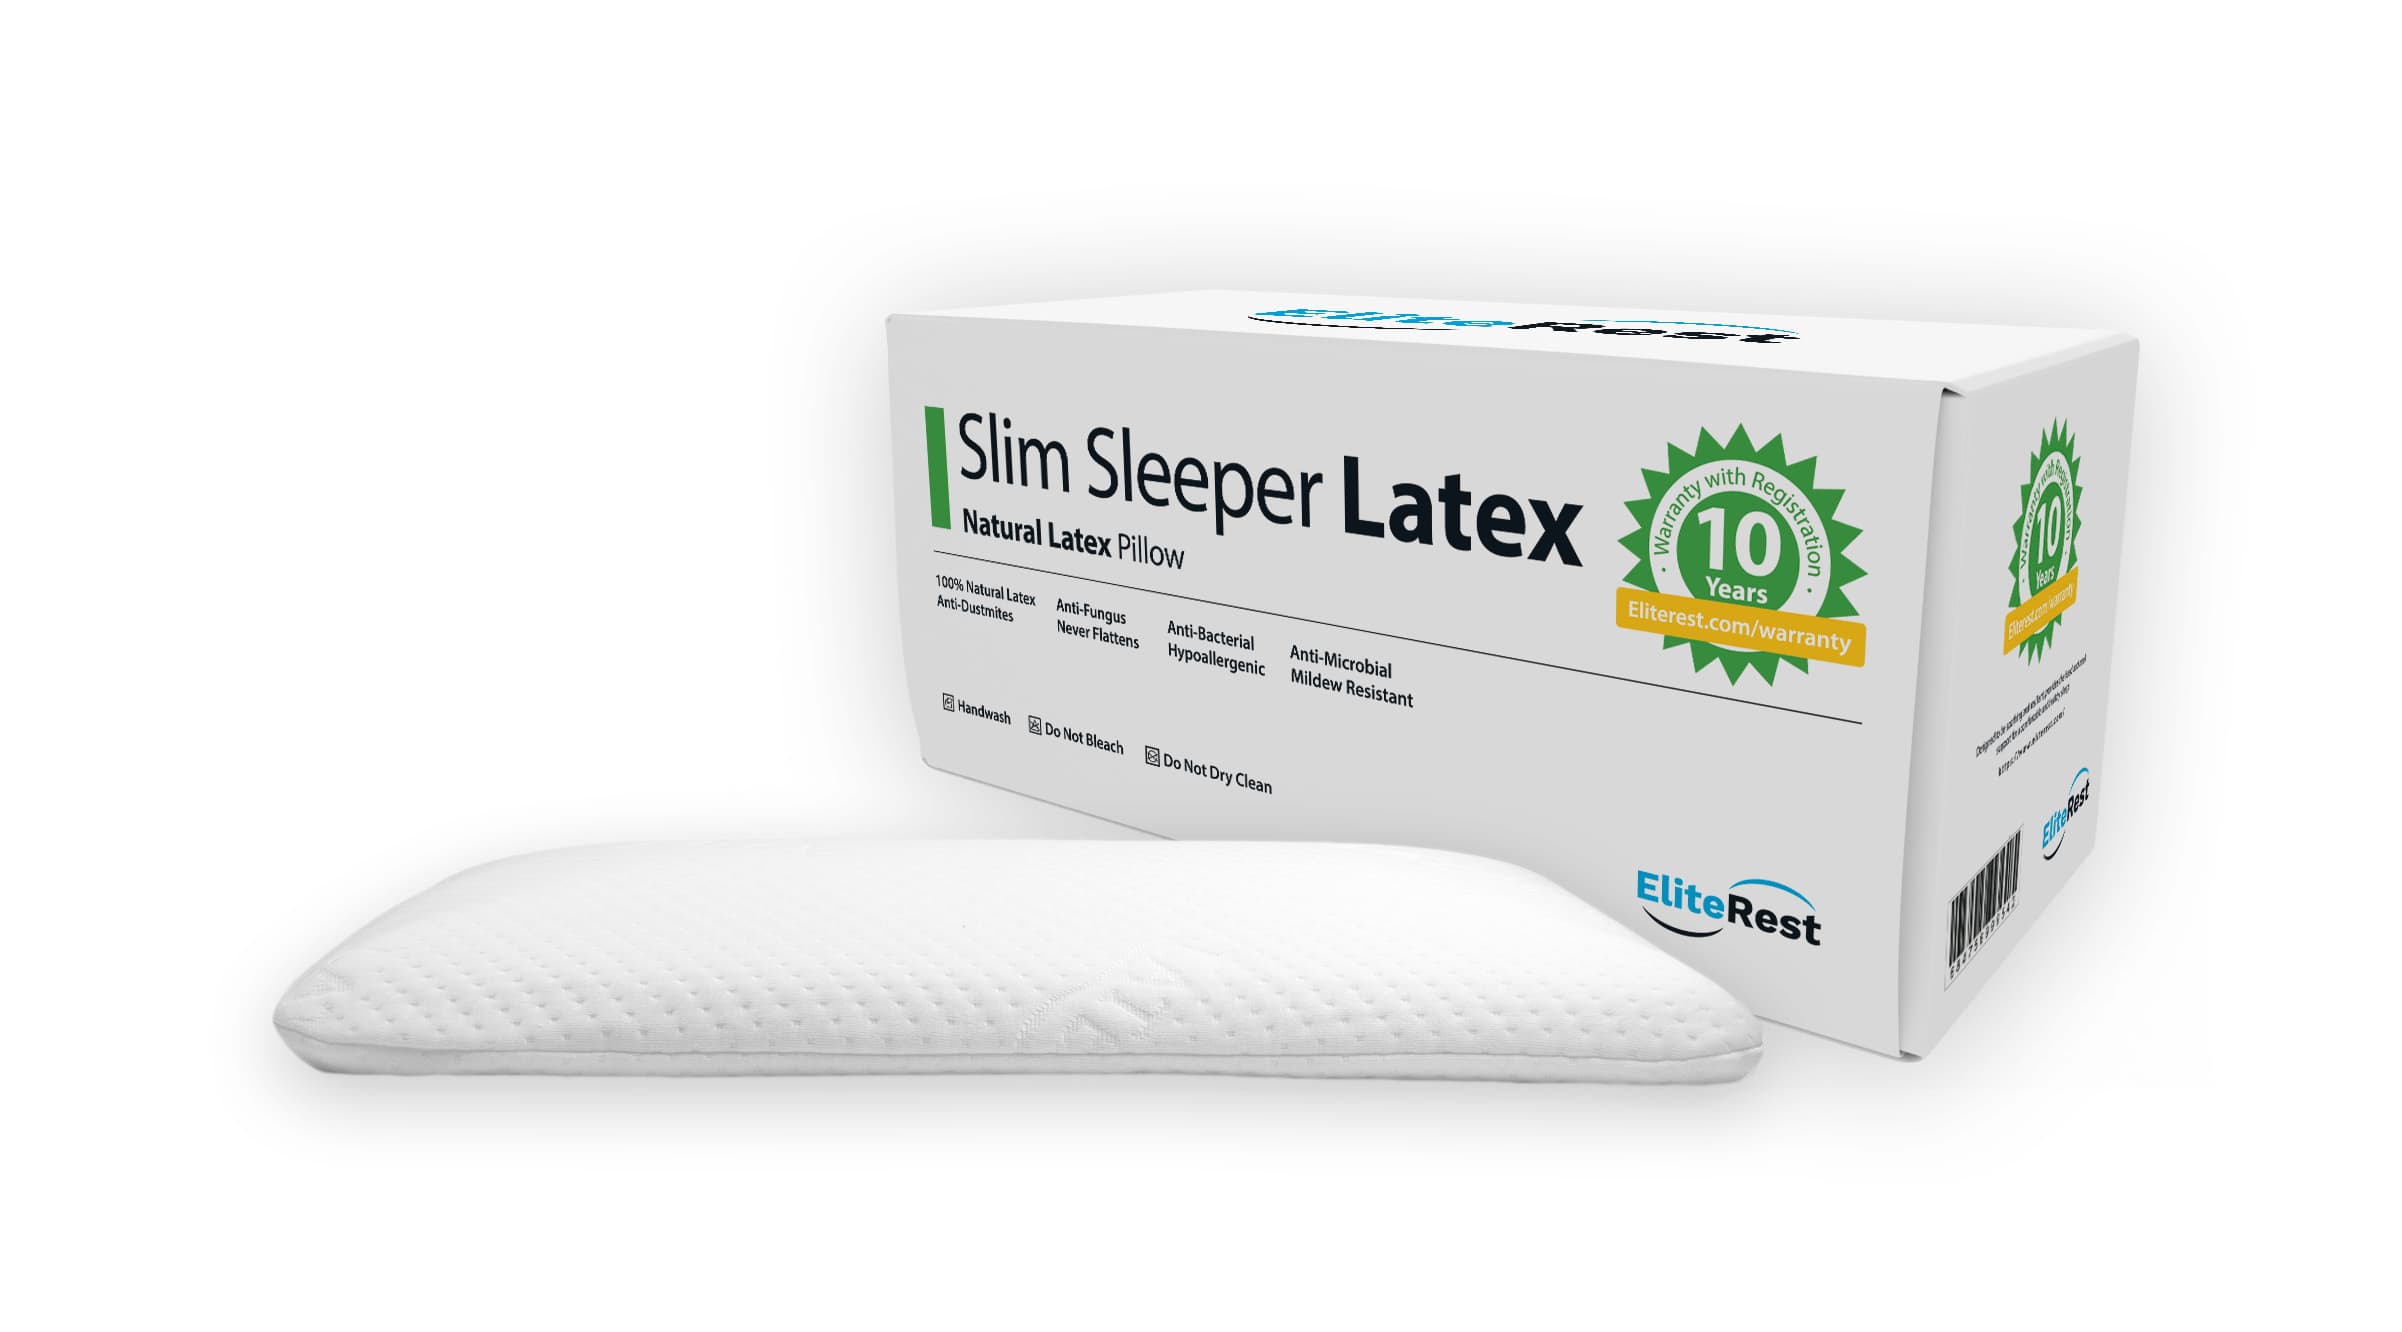 Slim Sleeper Natural Latex Pillow, 2.75 inches, Thin Pillow for Back and  Stomach Sleepers